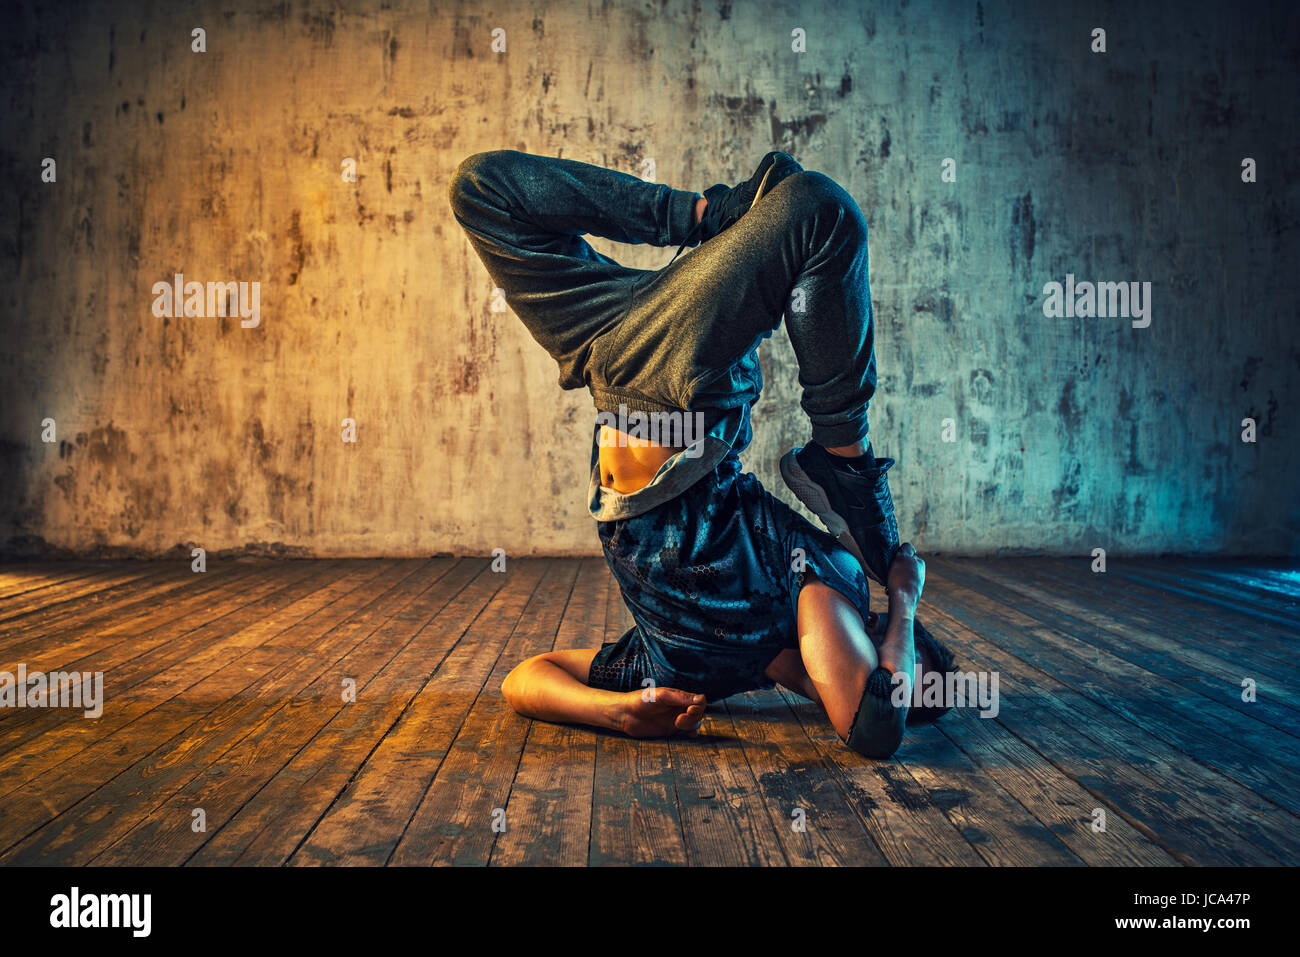 Young man break dancing on wall background. Vibrant colors effect. Stock Photo